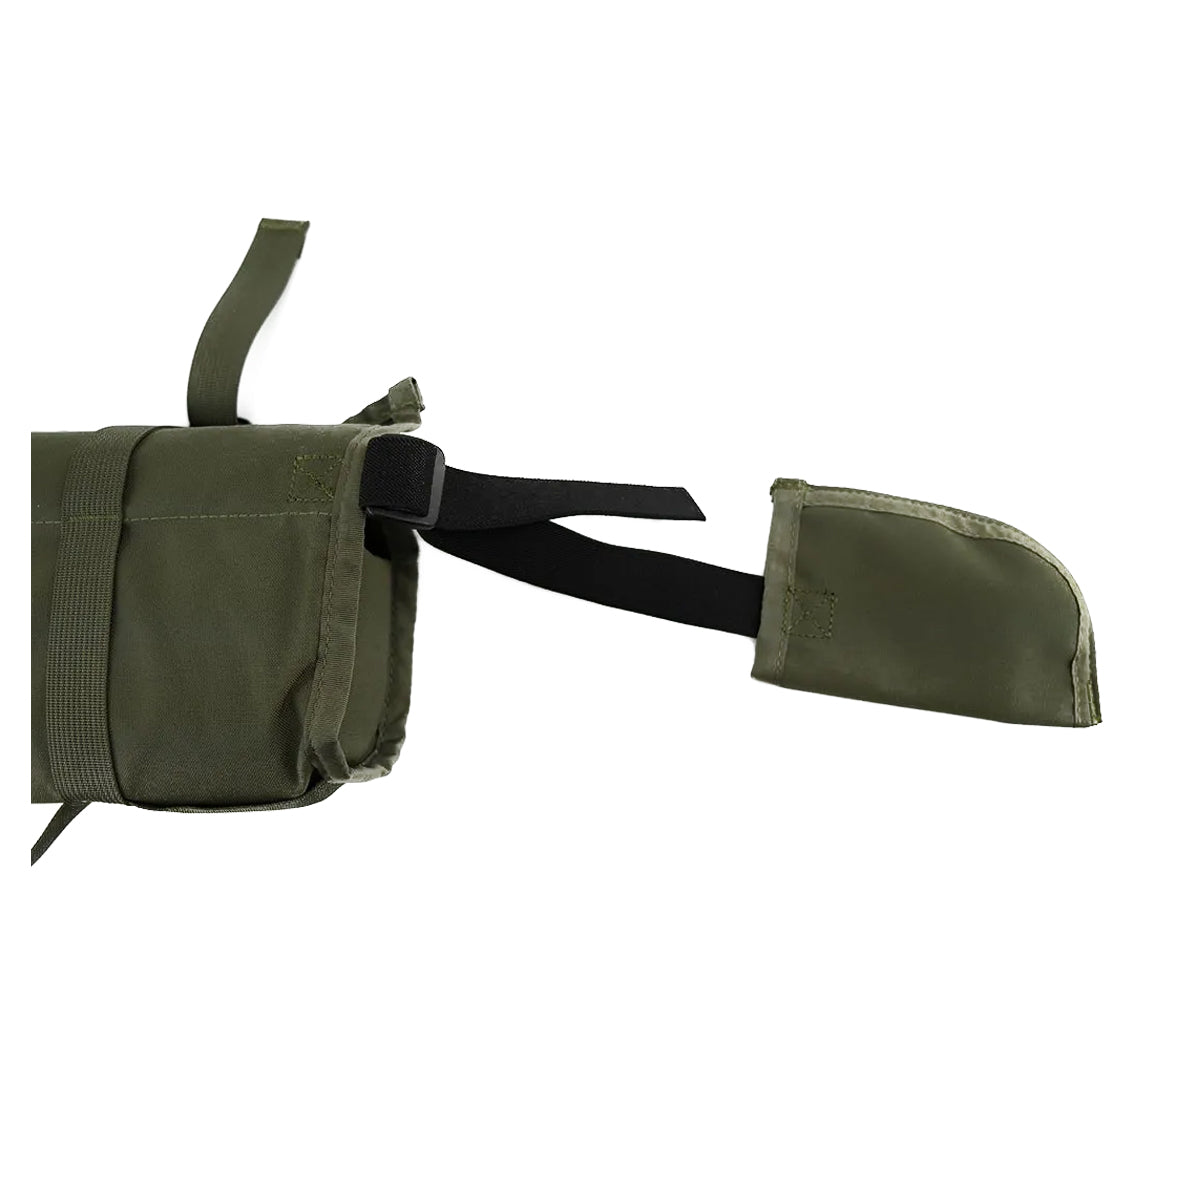 StHealthy Hunter 2-Piece Rifle Cover in Ranger Green by GOHUNT | StHealthy Hunter - GOHUNT Shop